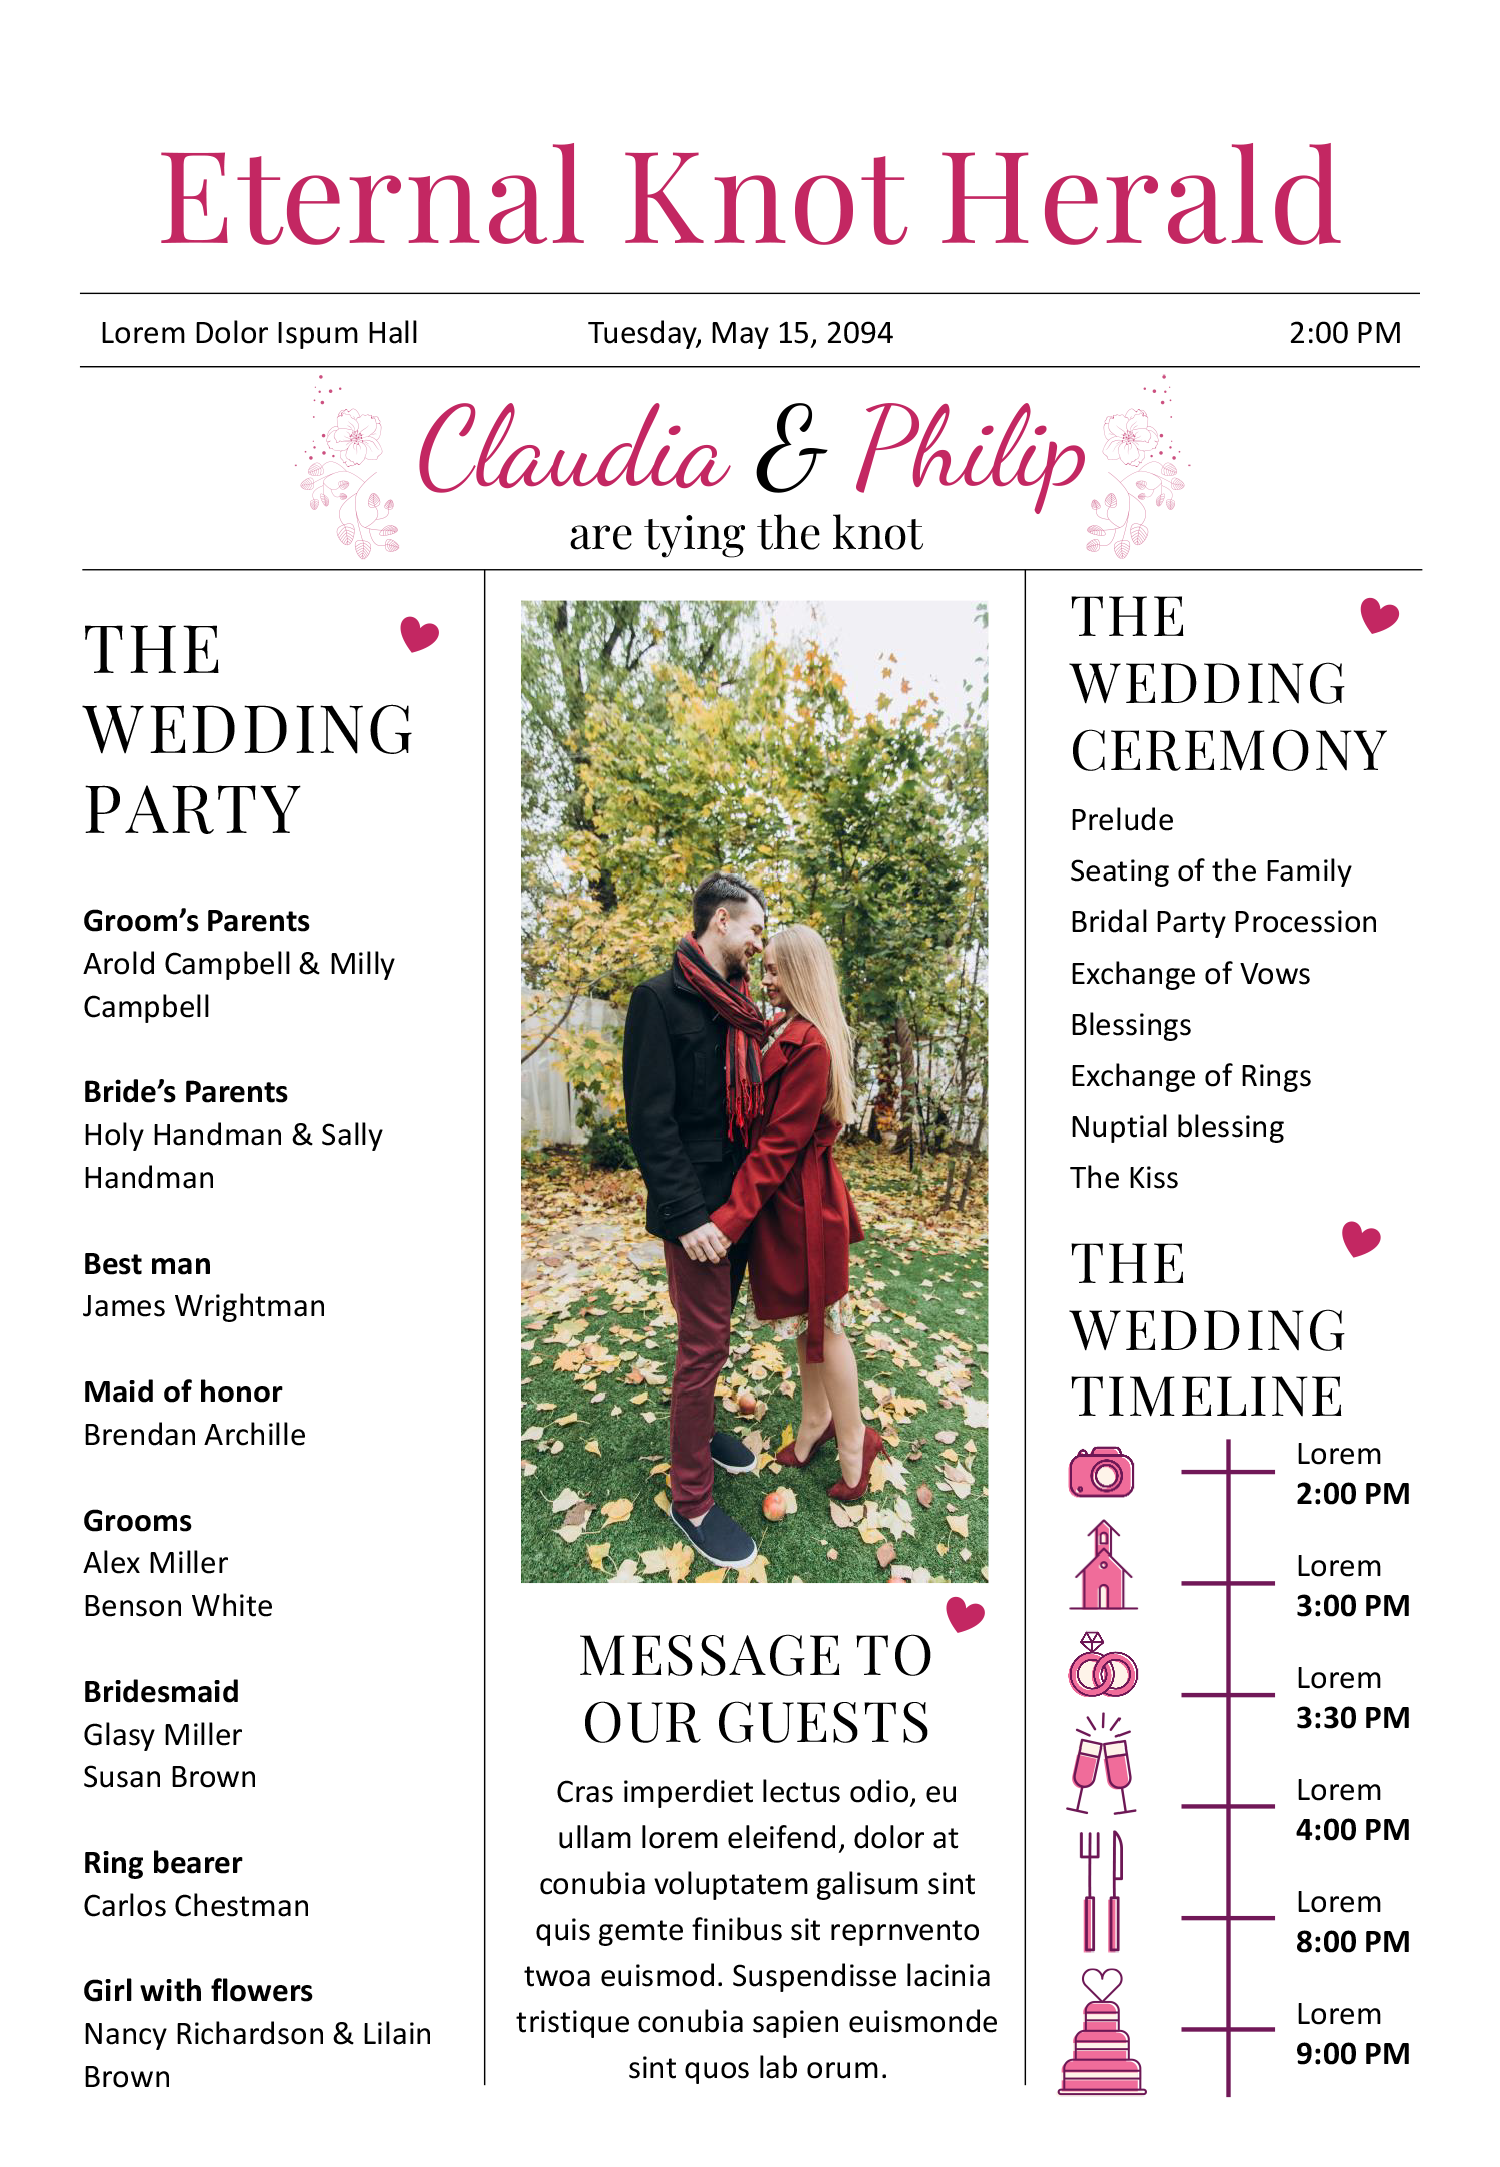 Pink Newspaper Wedding Program Template - Front Page